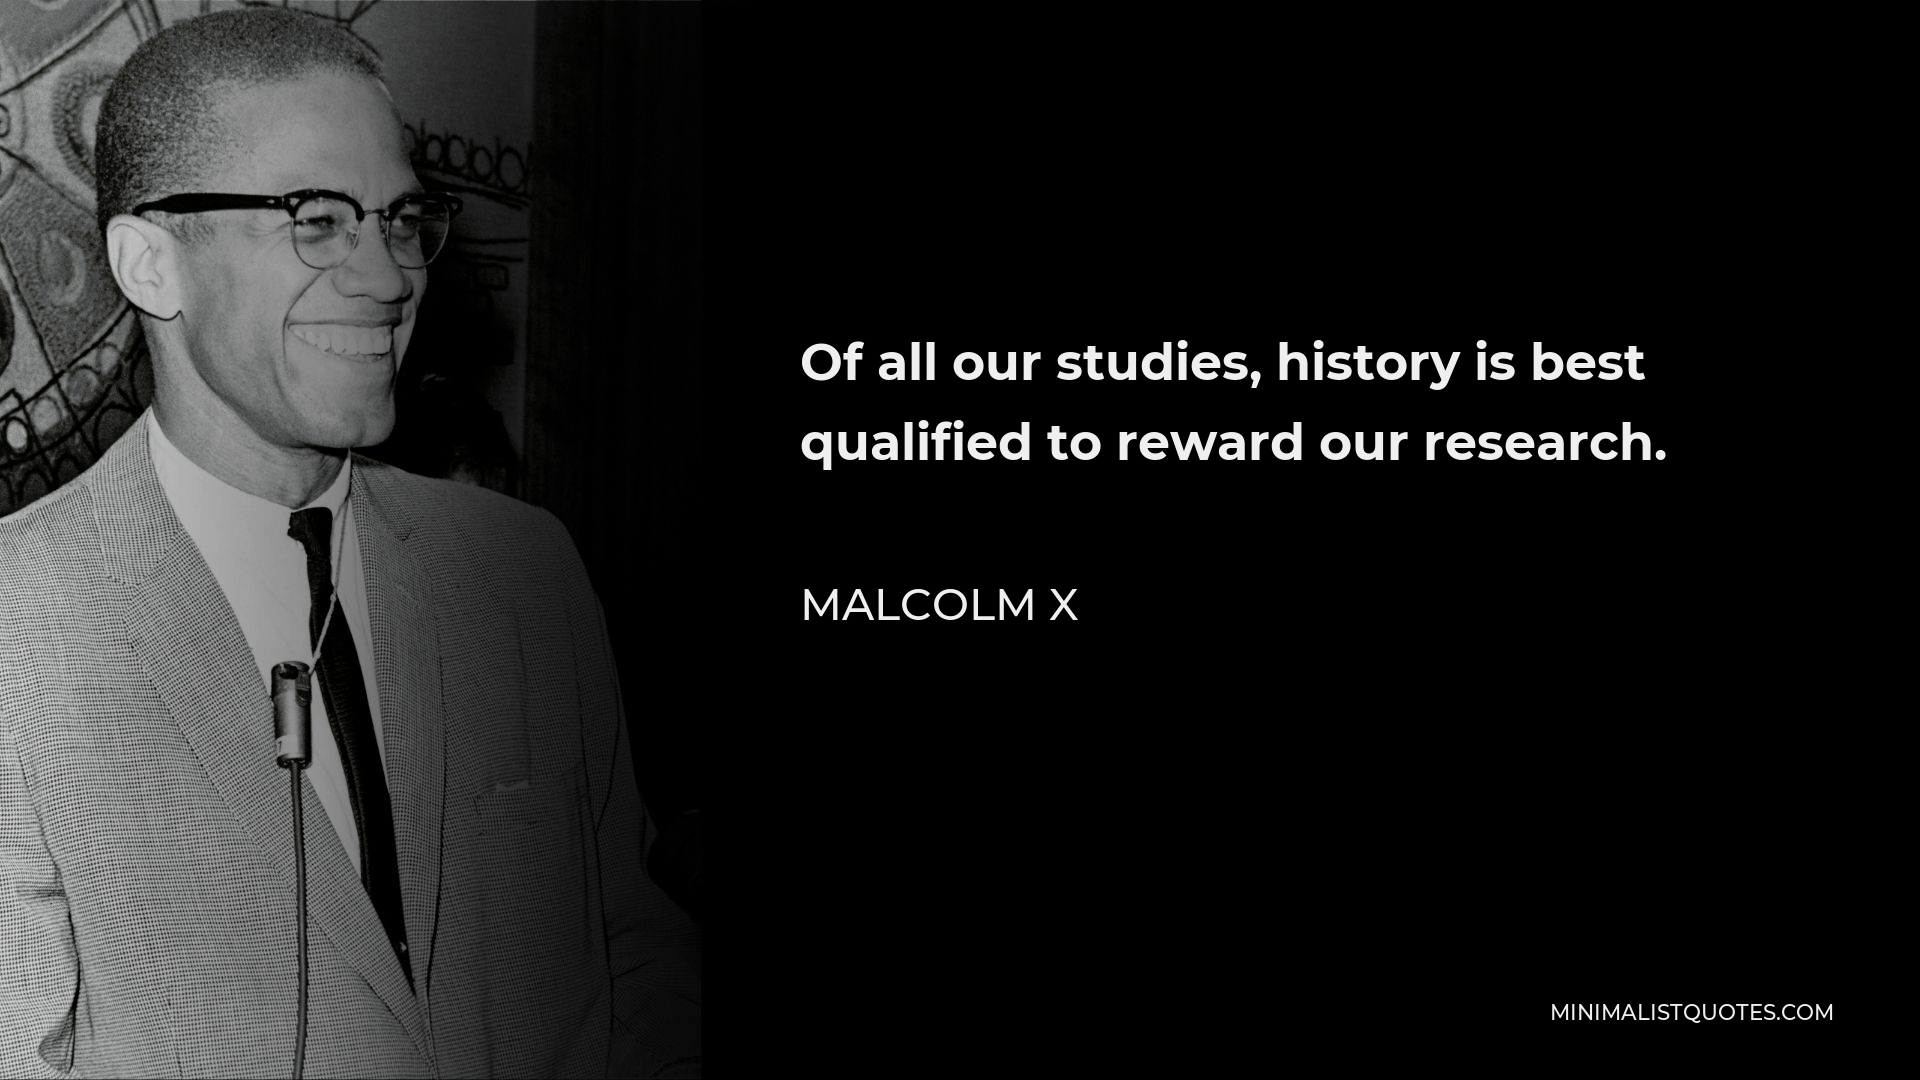 Malcolm X Quote - Of all our studies, history is best qualified to reward our research.